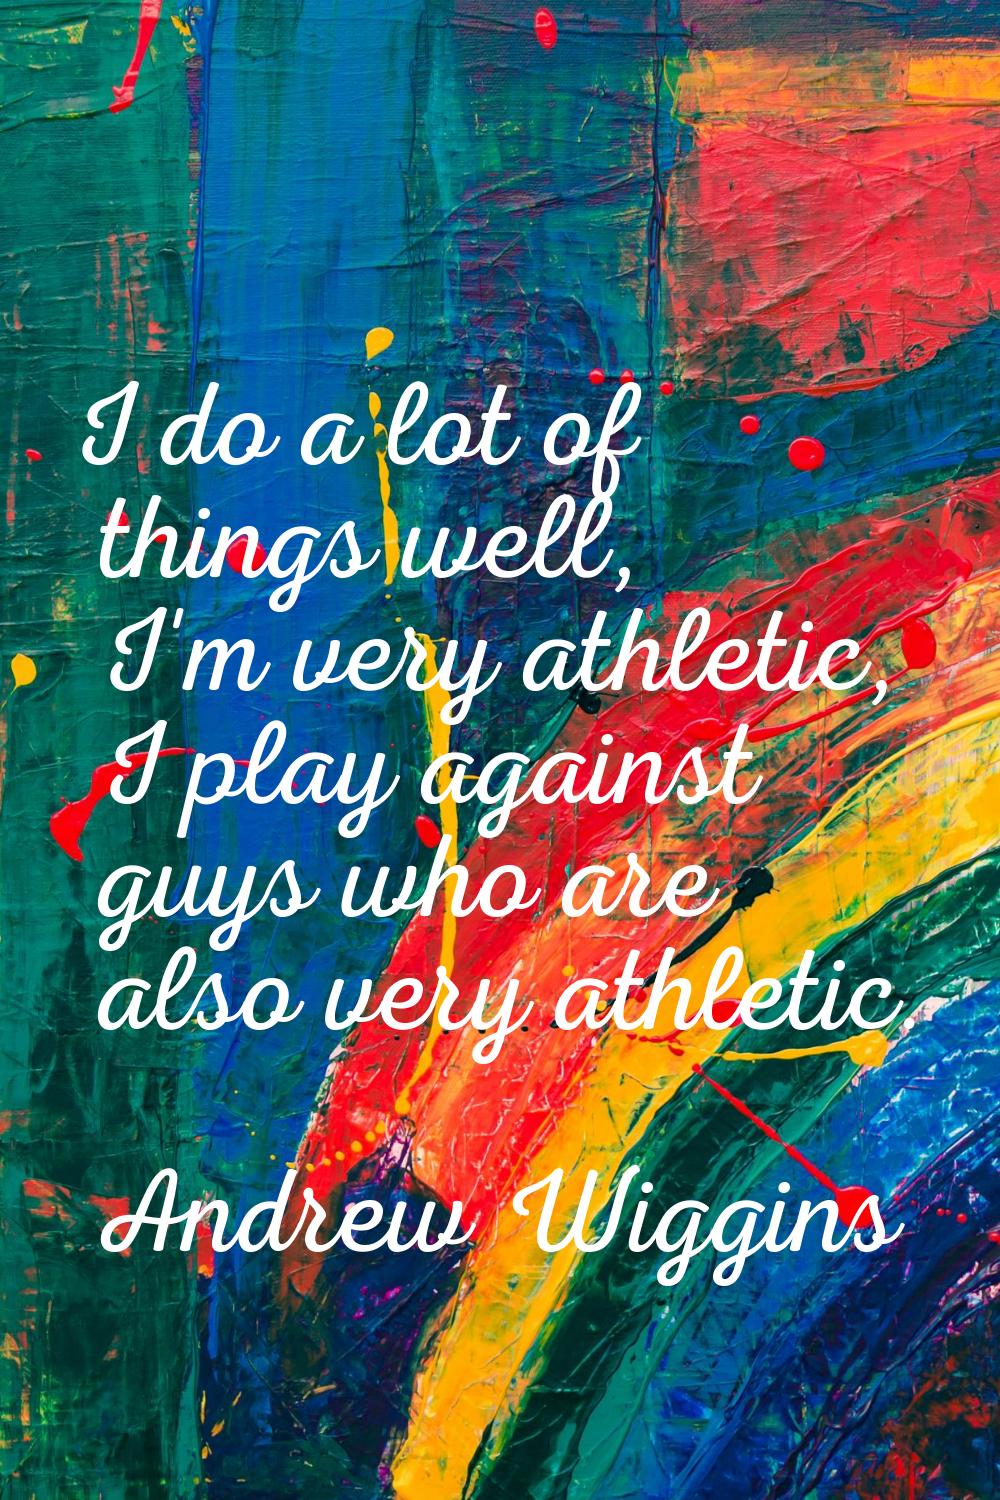 I do a lot of things well, I'm very athletic, I play against guys who are also very athletic.